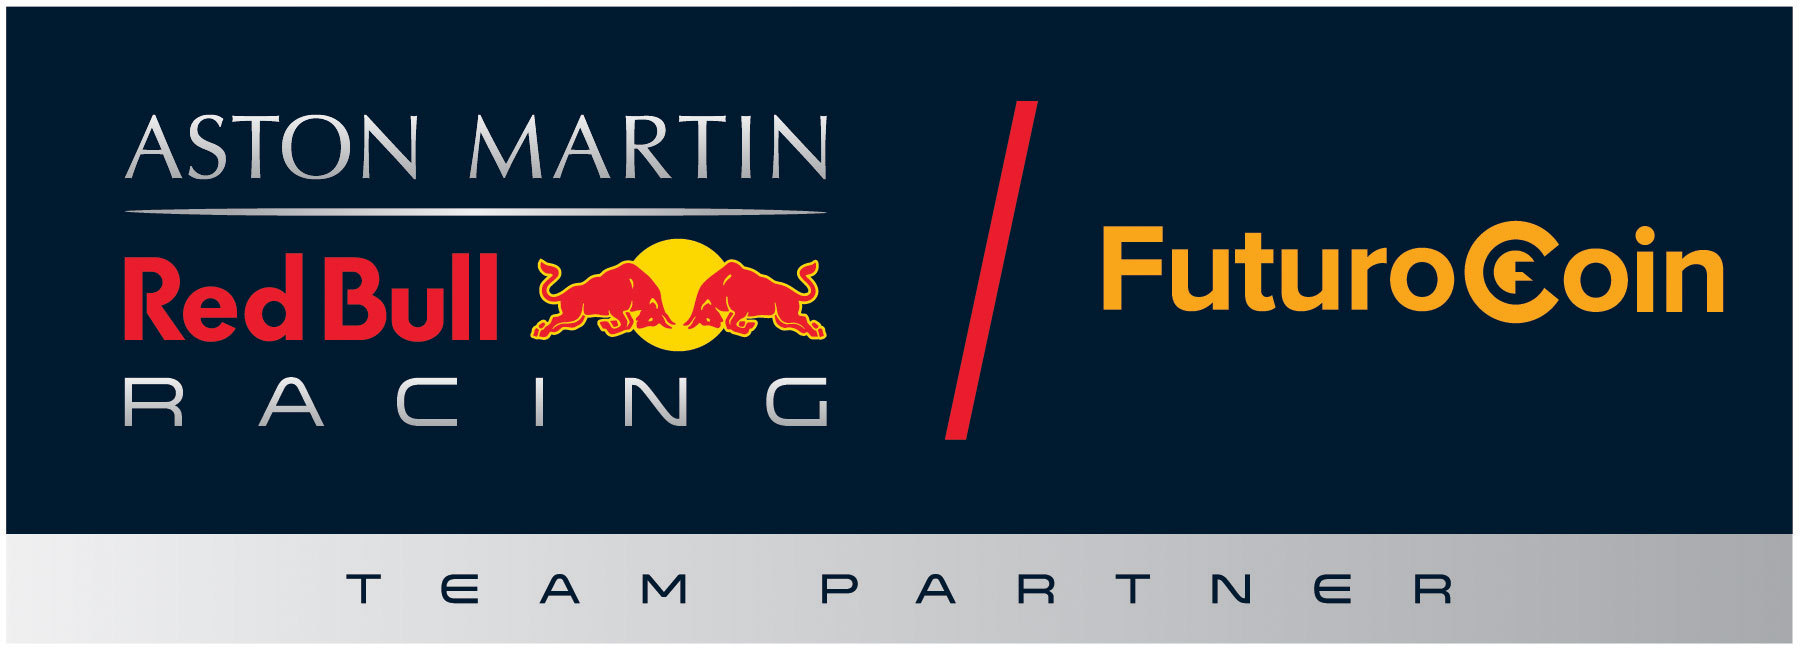 Futurocoin Unveiled As Partner Of Aston Martin Red Bull Racing In First Ever F1 Cryptocurrency Sponsorship Business Wire